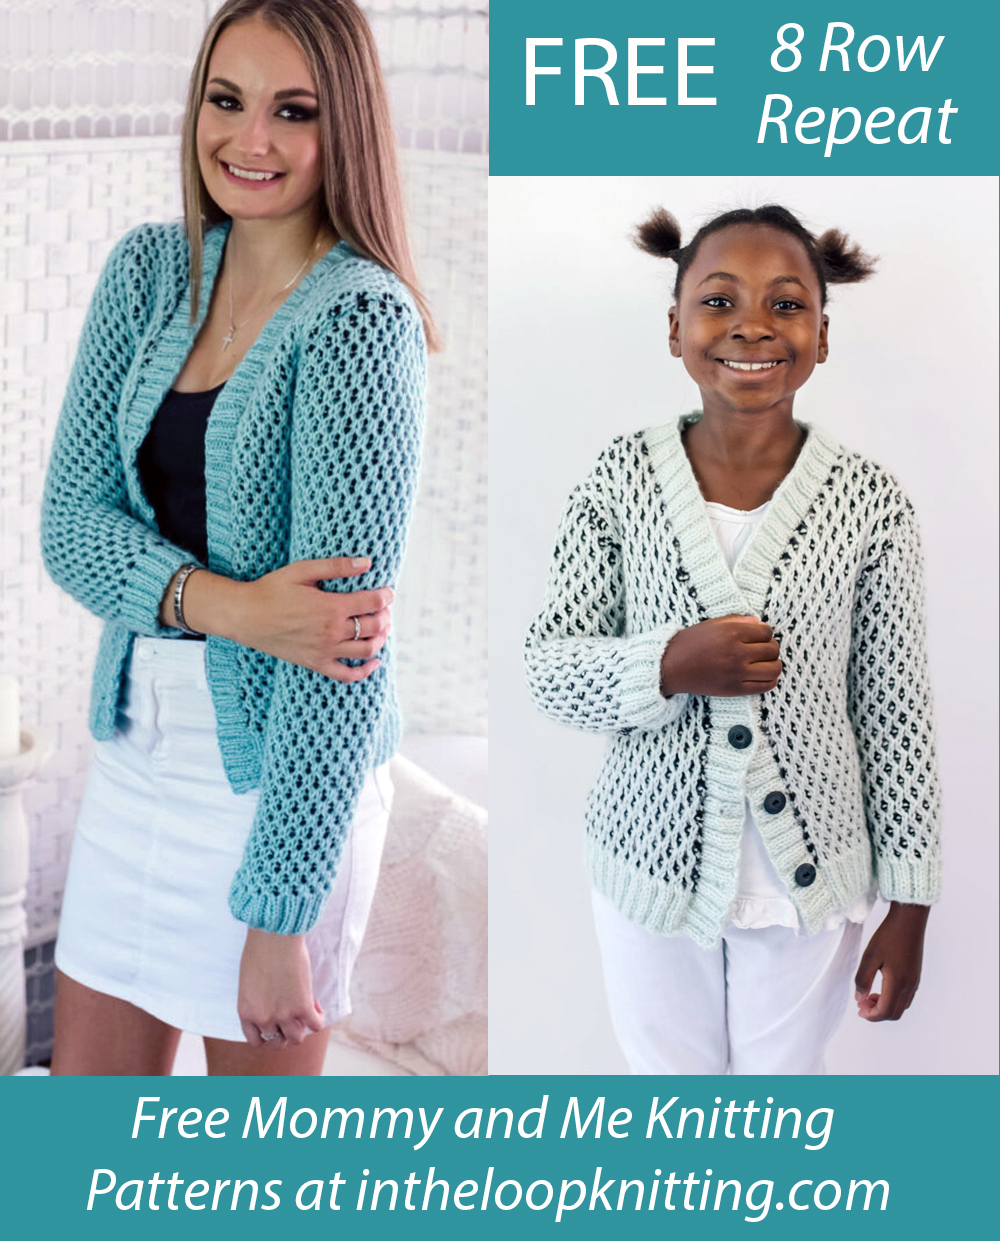 Free Honeycomb Cardigan Knitting Pattern in Women and Child Sizes